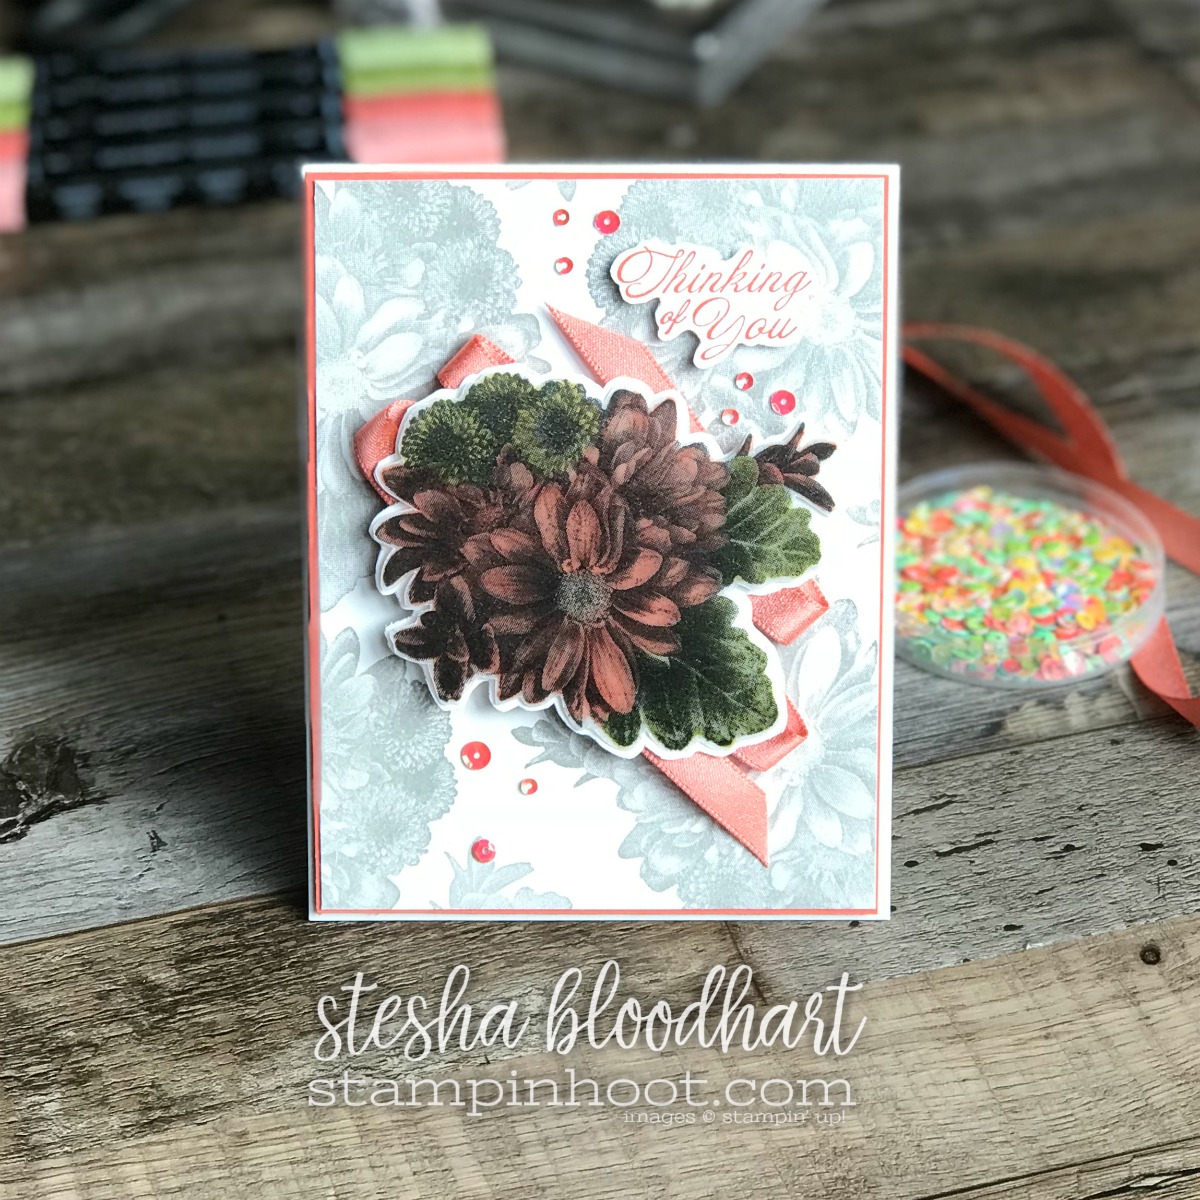 Heartfelt Blooms 2018 Sale-a-Bration Set Earned Free with $50 Purchase, Buy Online at Stampin' Hoot! Stesha Bloodhart #stampinhoot #steshabloodhart